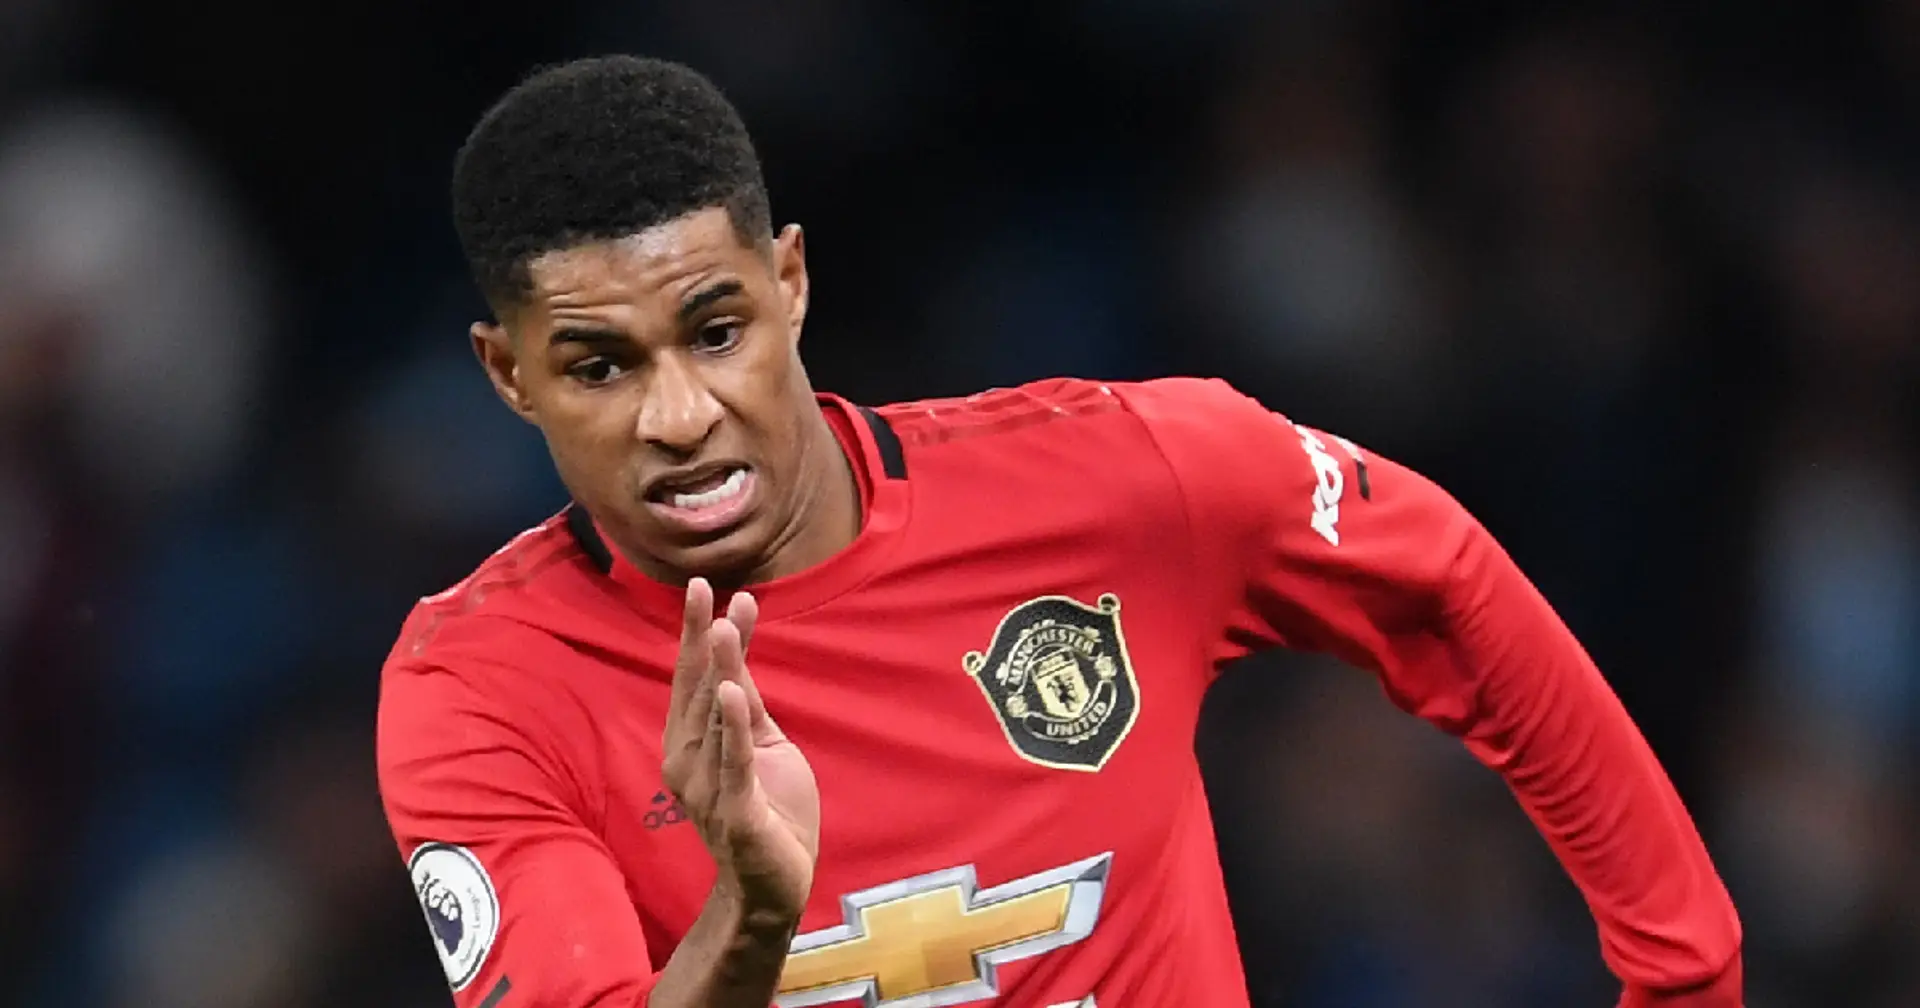 Why does Ole keep using Rashford when it's evident he's not in form?